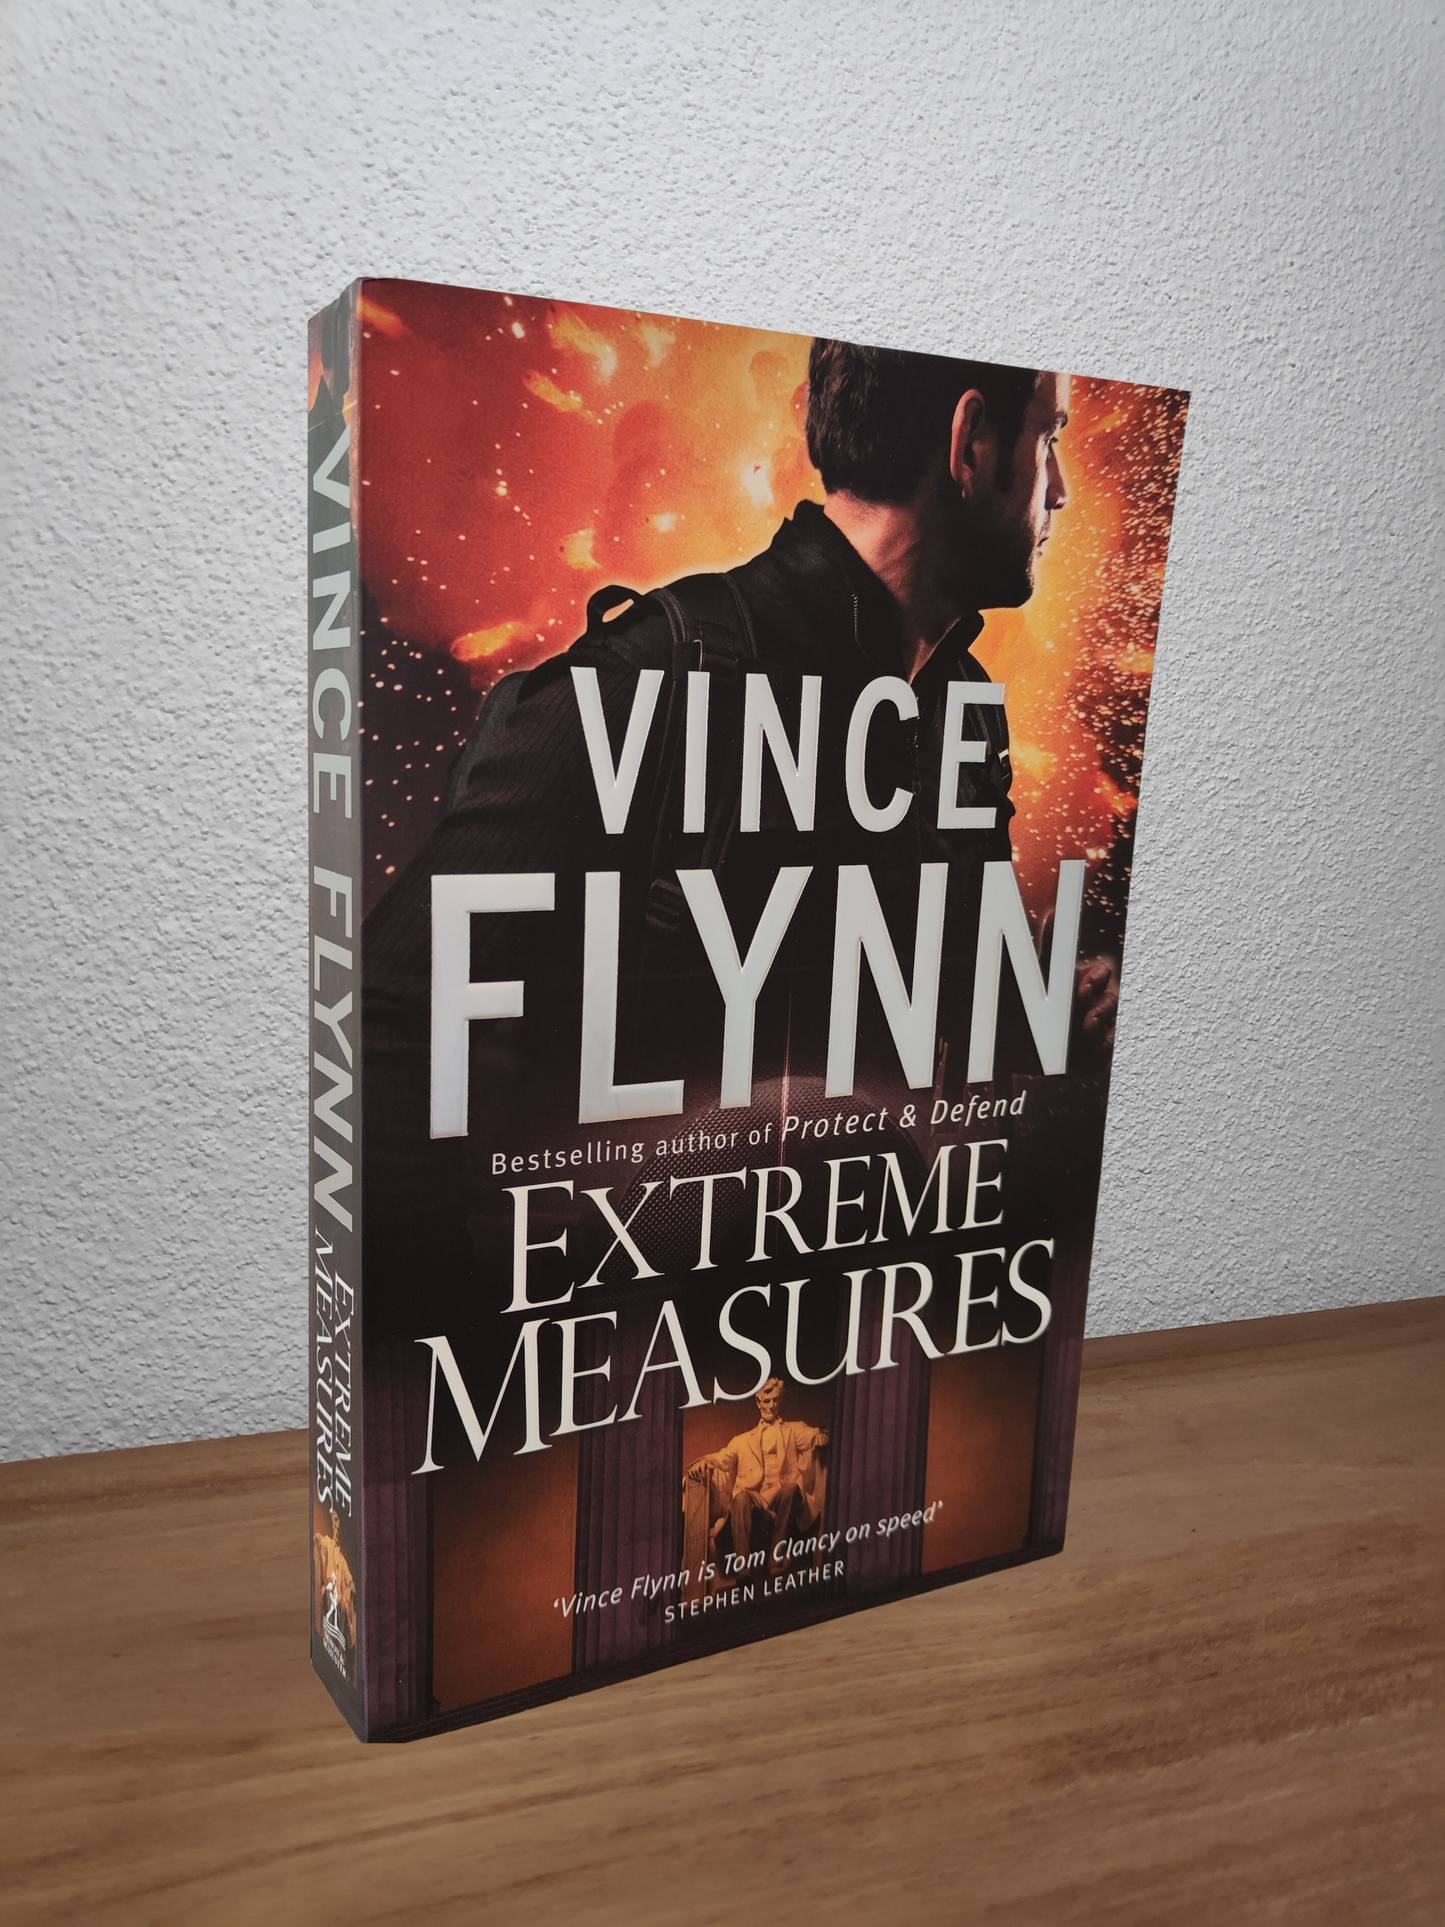 Vince Flynn - Extreme Measures (Mitch Rapp #11)